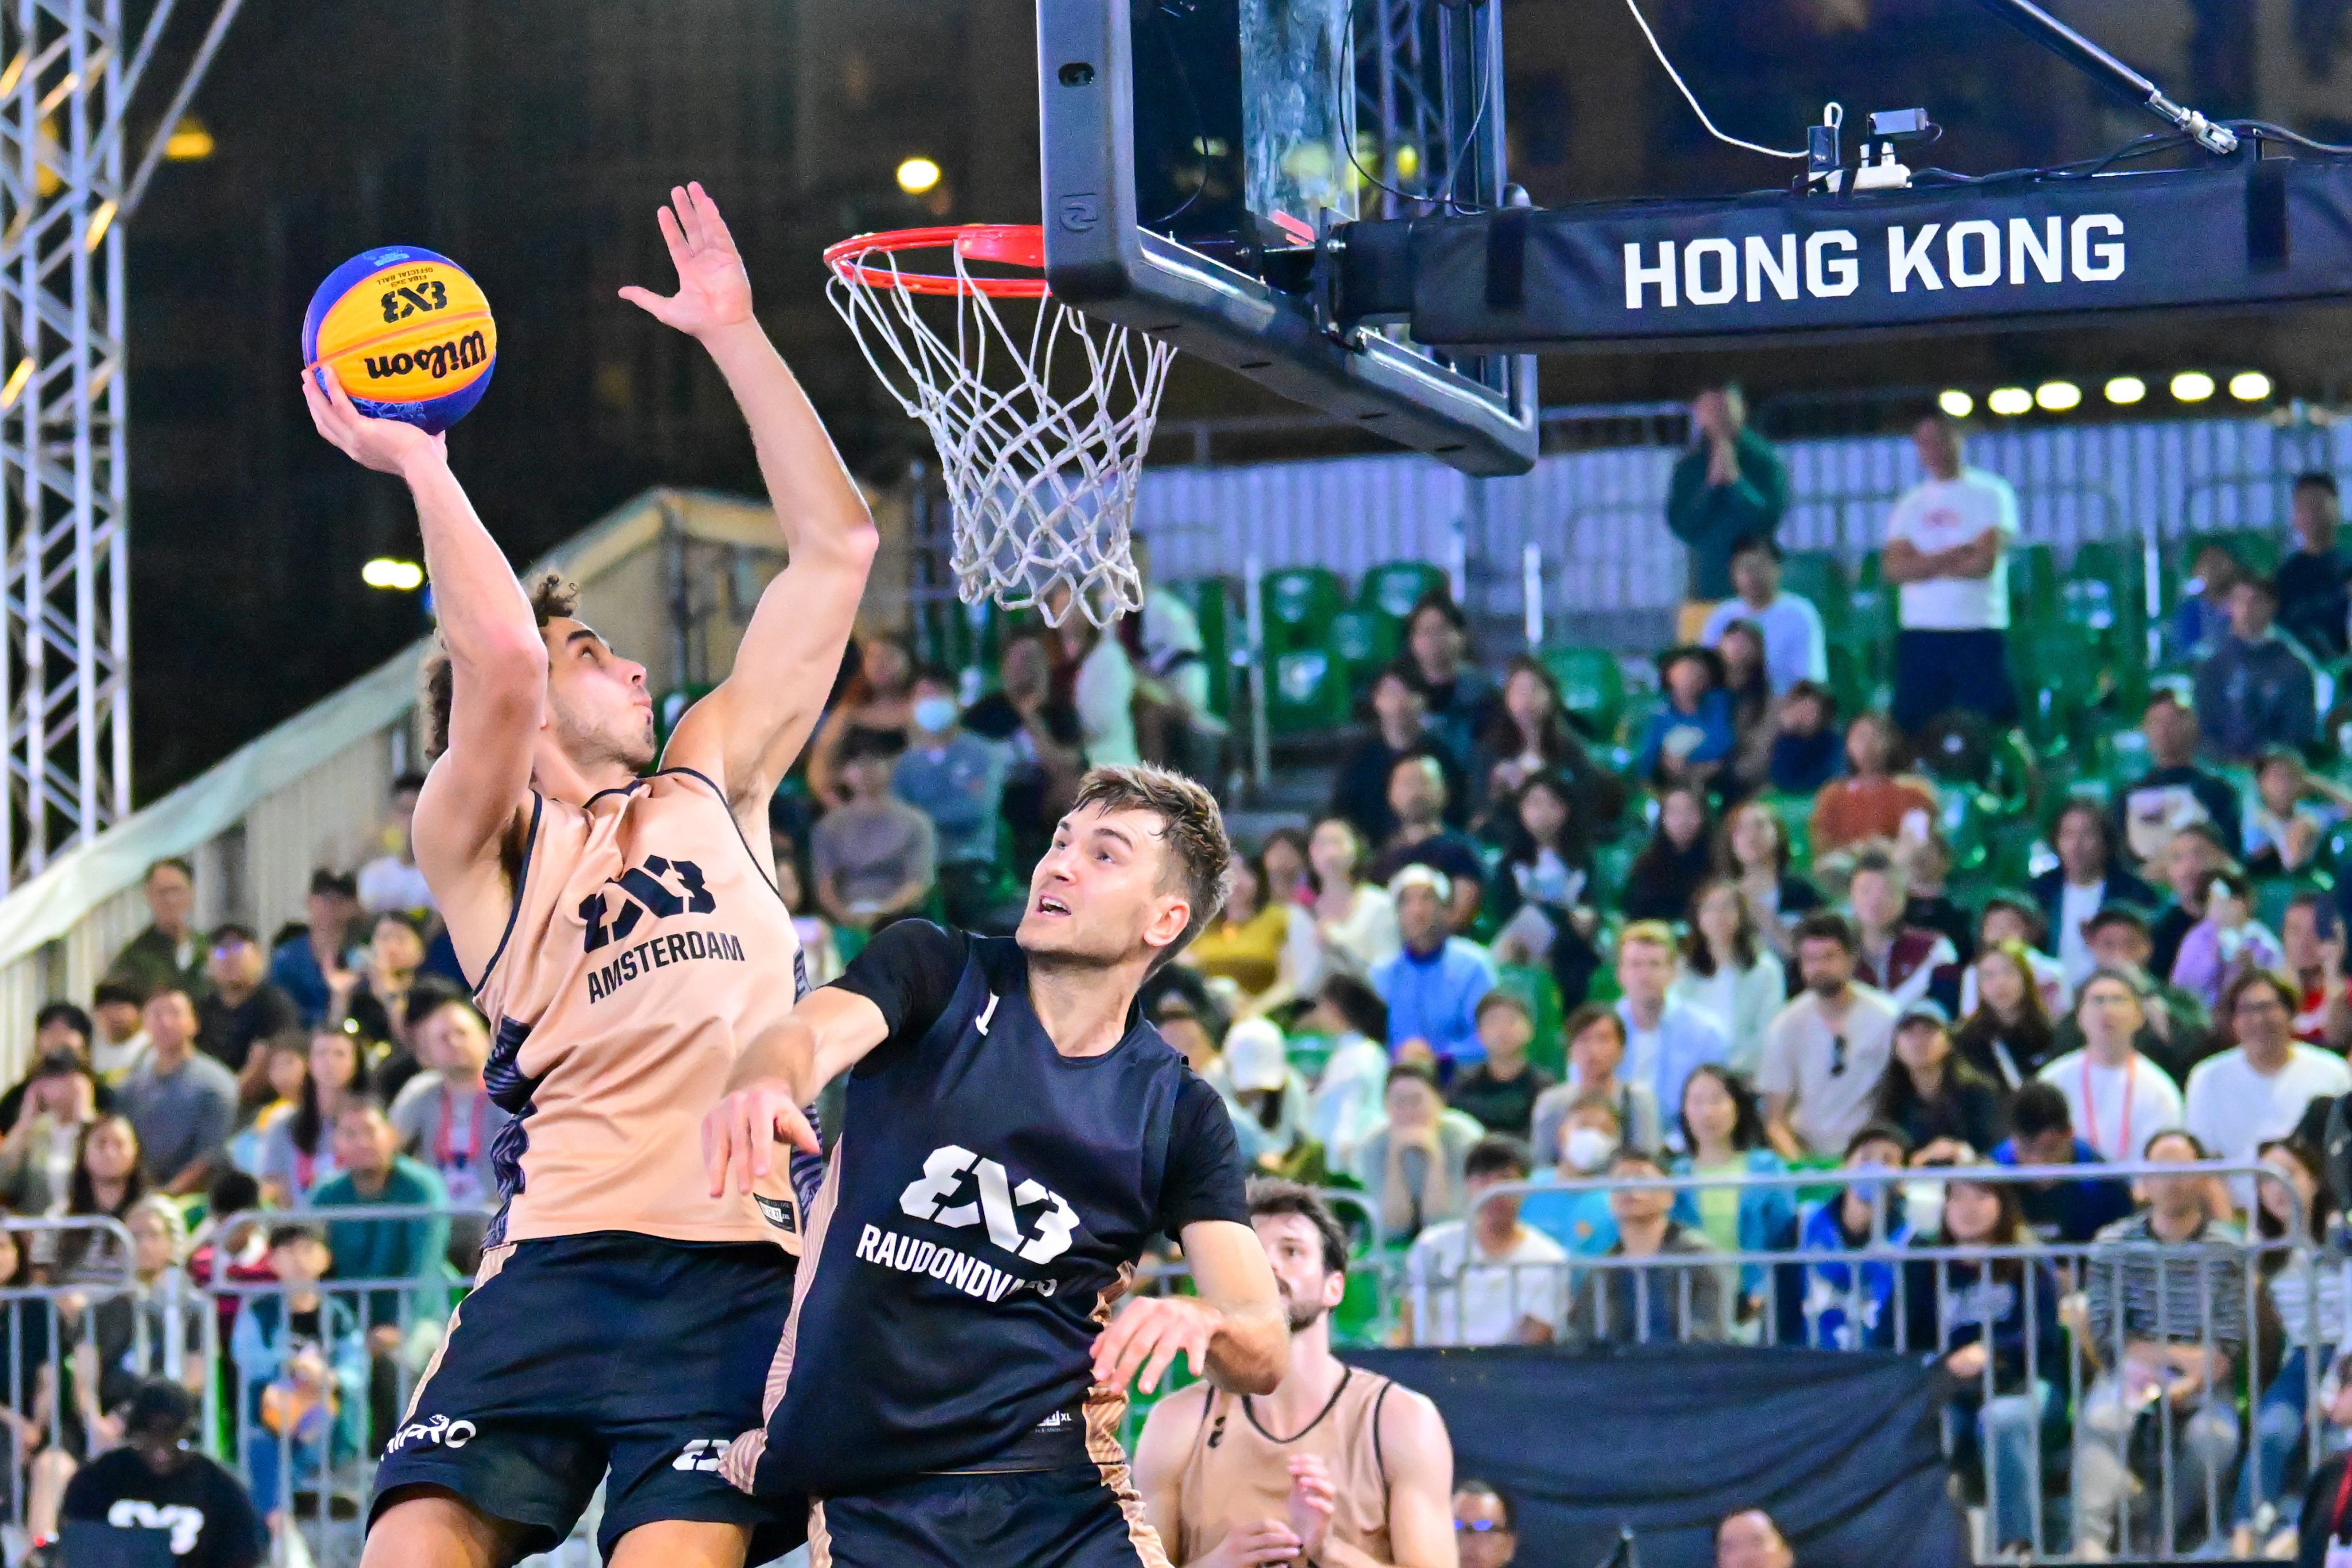 Jan Driessen (left) of Amsterdam HiPRO goes for a lay-up during Sunday’s Hong Kong Masters final against Raudondvaris Hoptrans. Photo: Xinhua